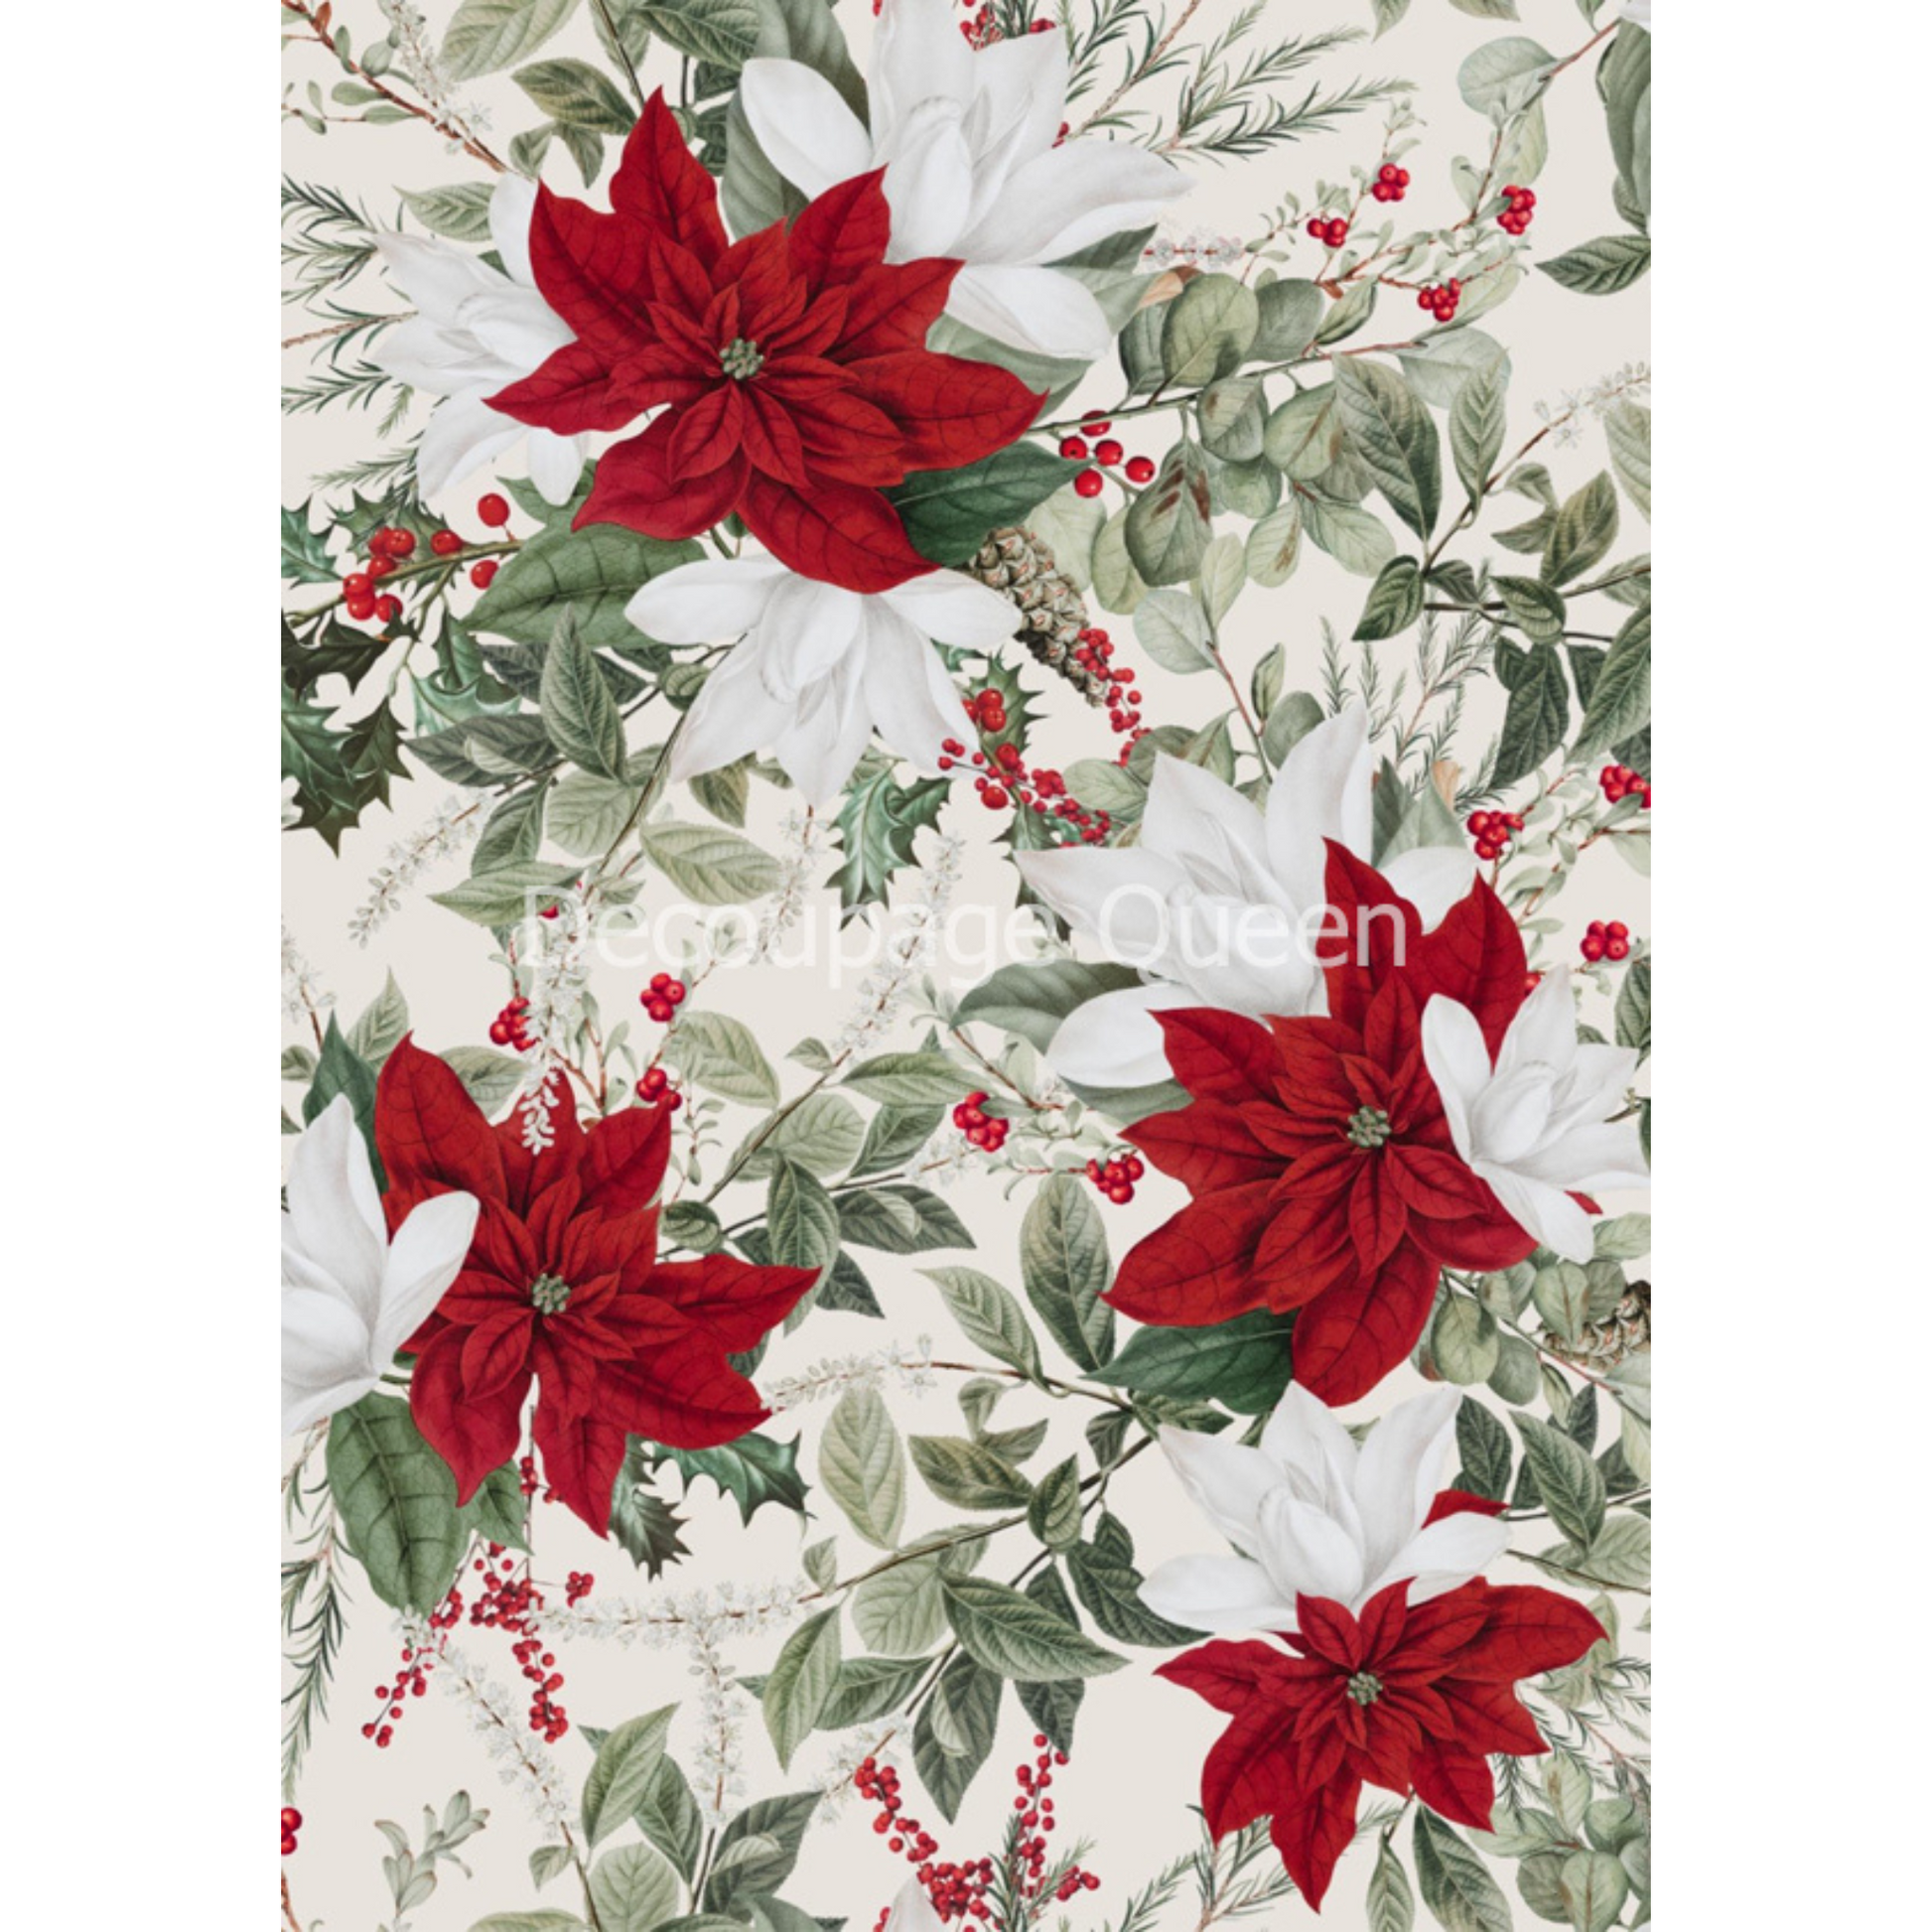 Chistmas Poinsettas-White-decoupage rice paper by Decoupage Queen available at Milton's Daughter.